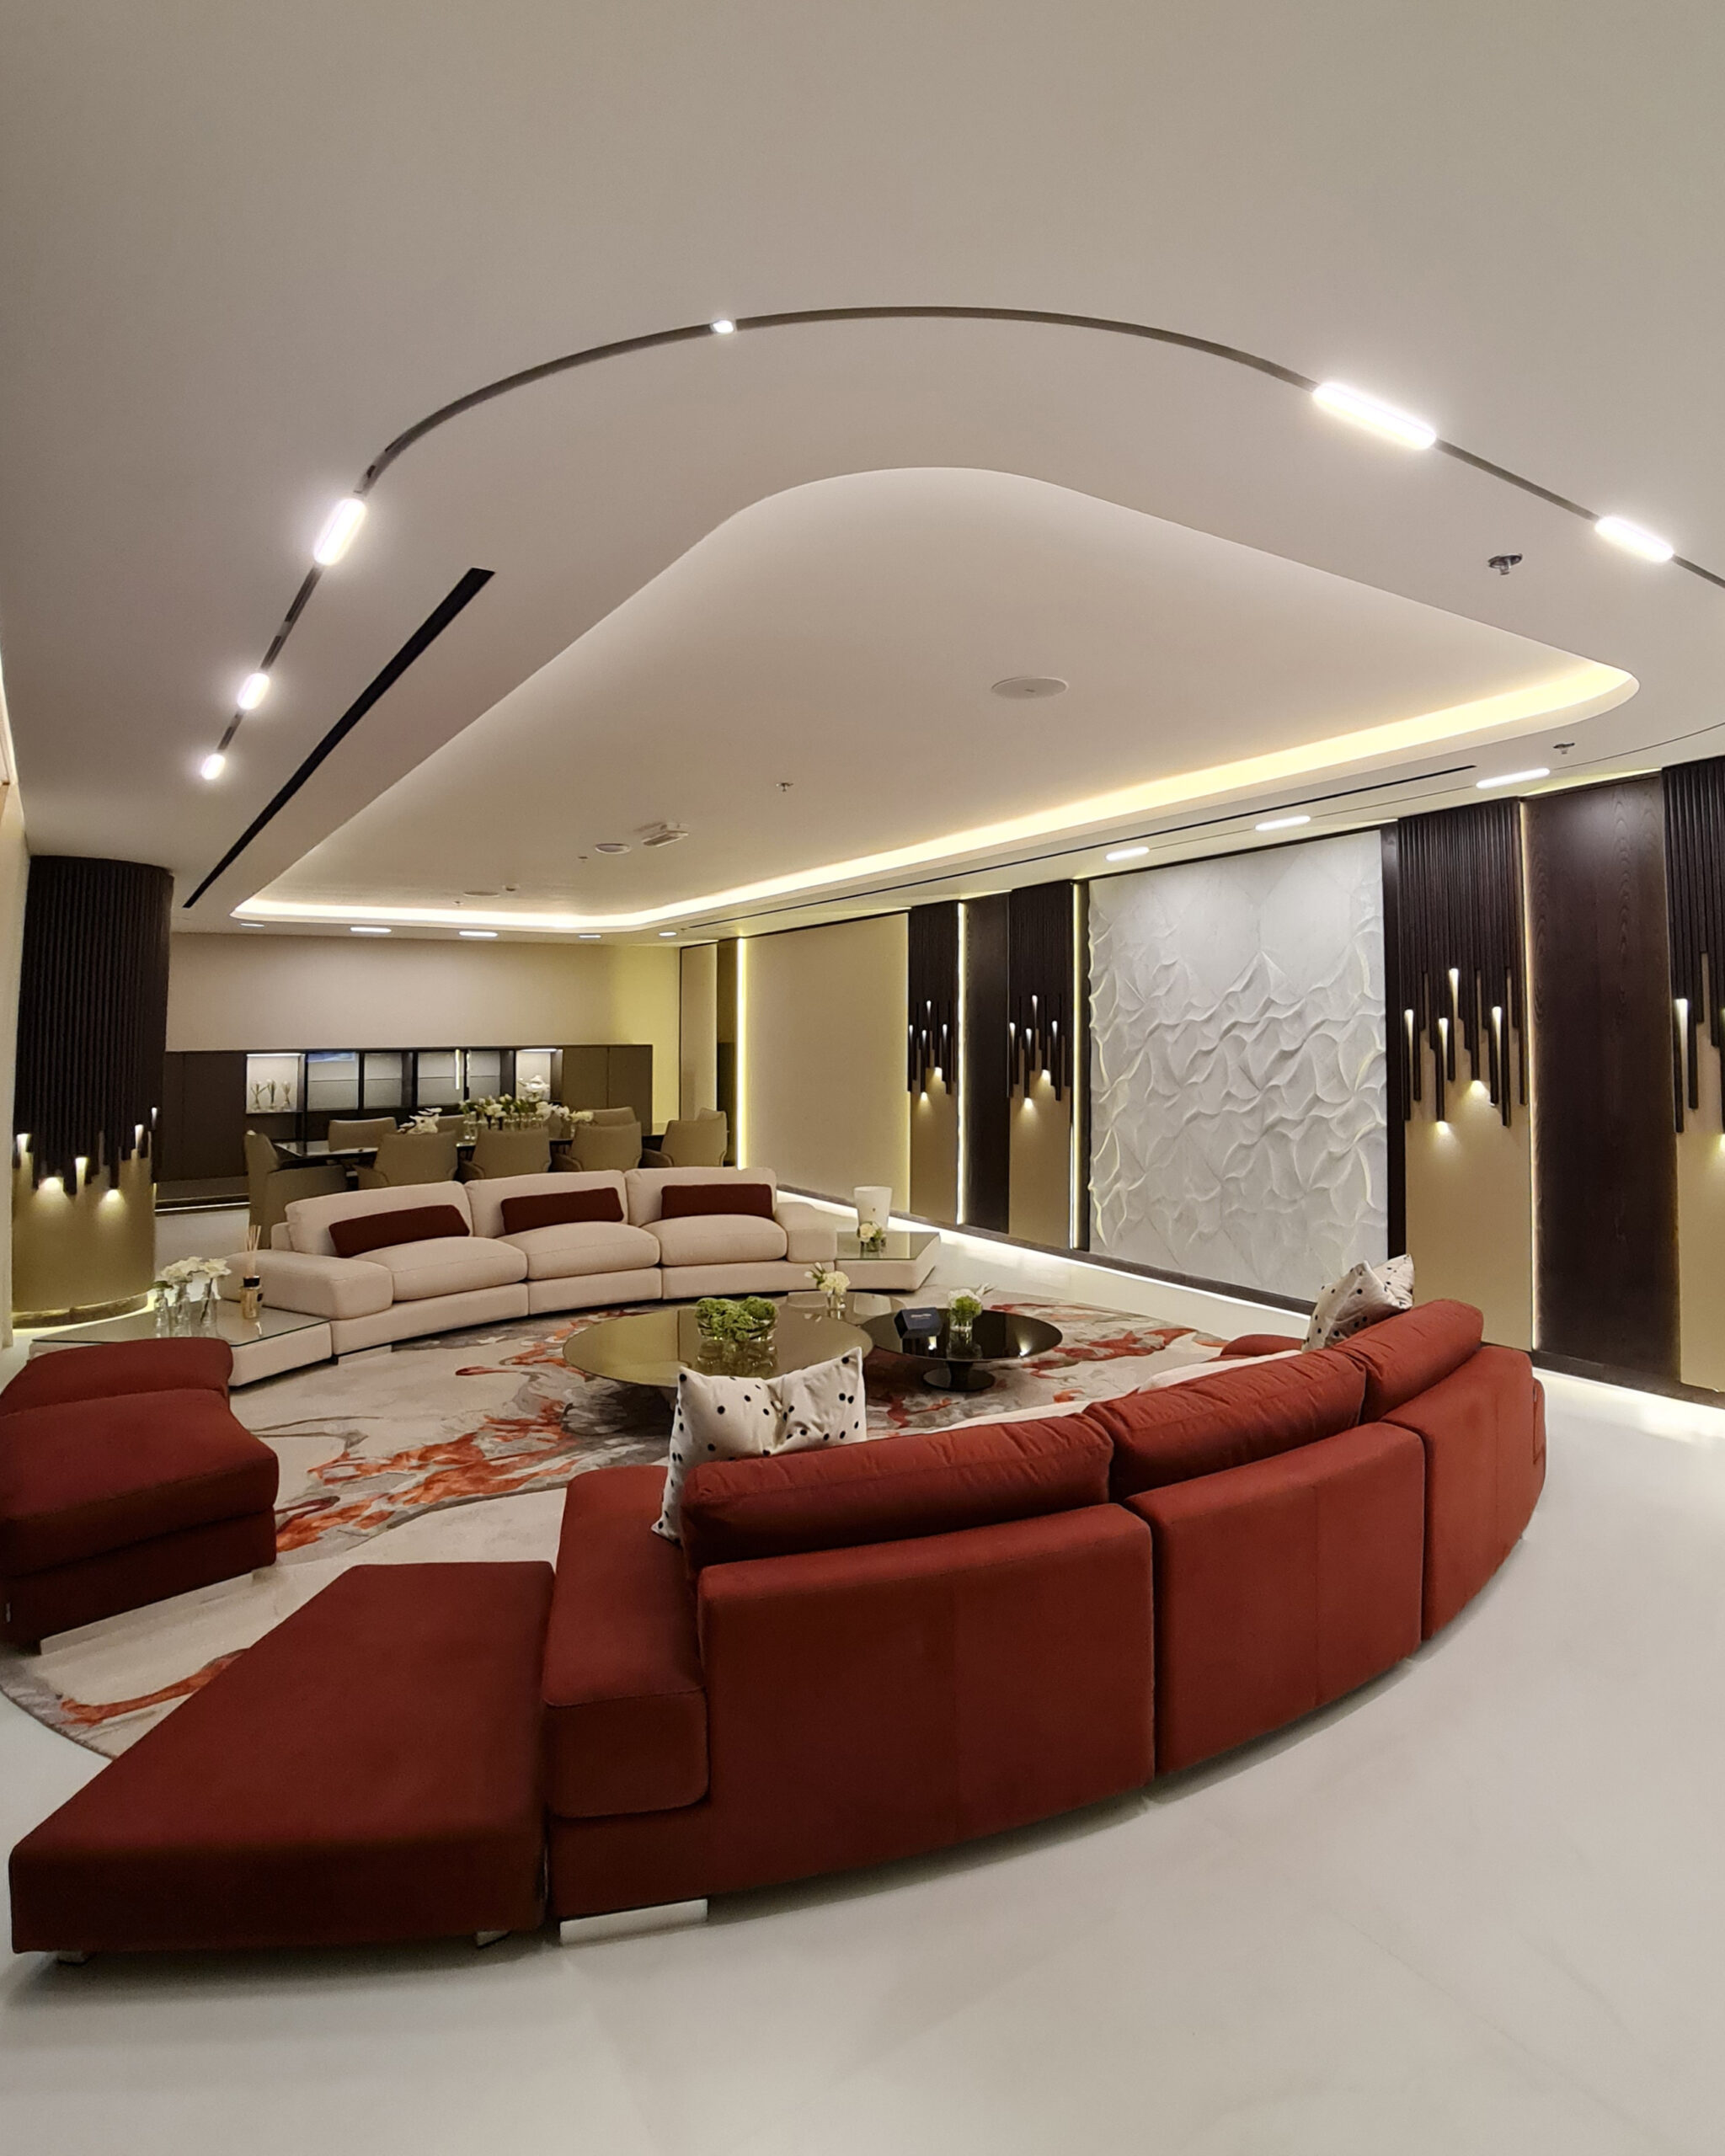 Improve The Look And Feel Of Your Home With Luxury Interior Design